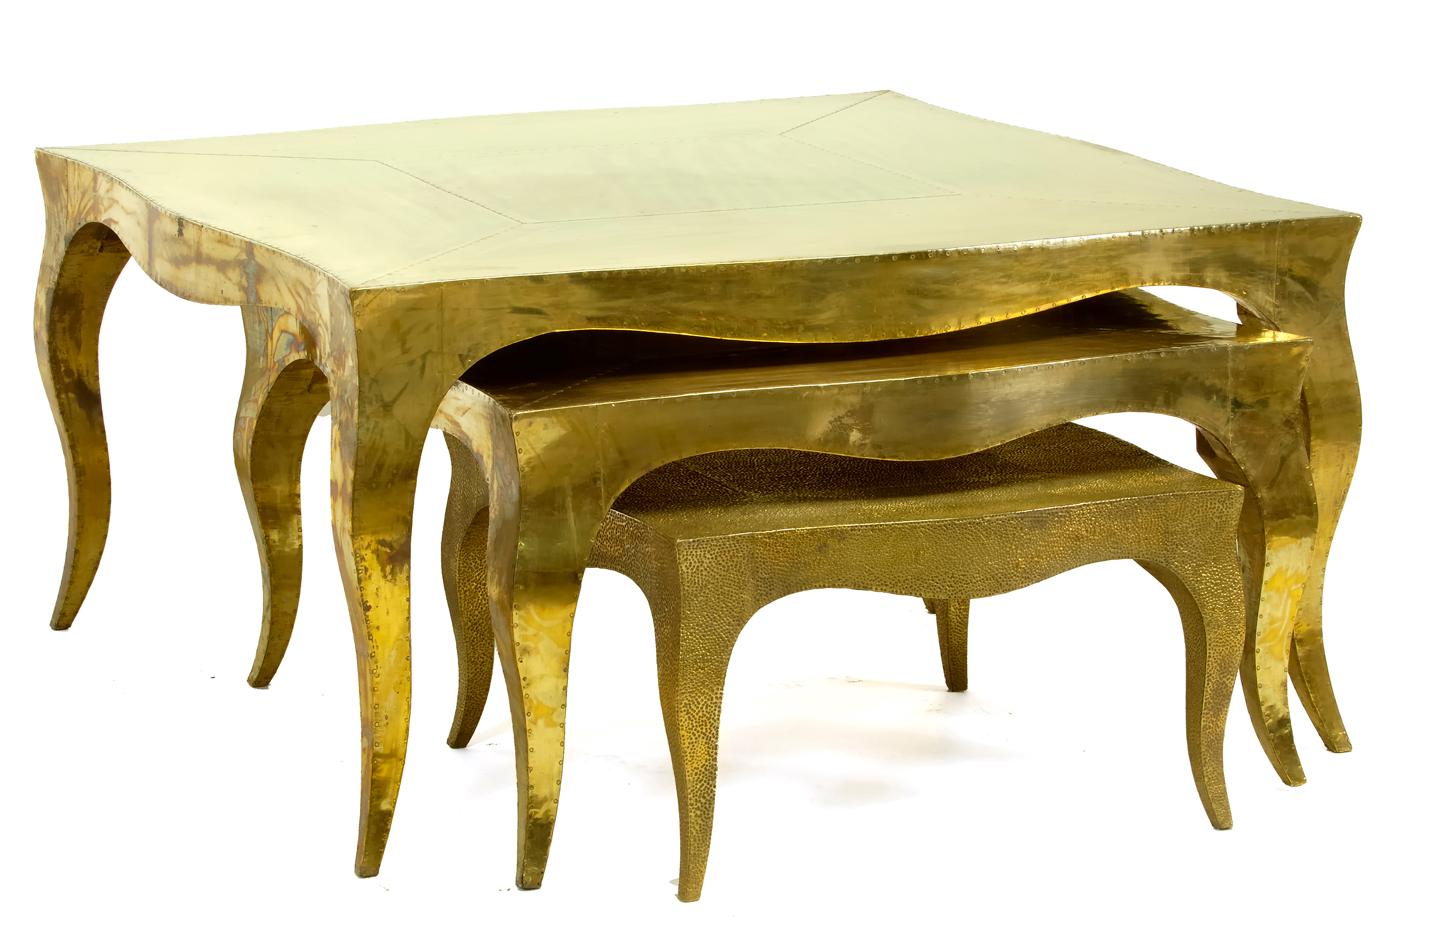 Louise Art Deco Card Tables and Tea Tables Mid. Hammered Copper by Paul Mathieu For Sale 2